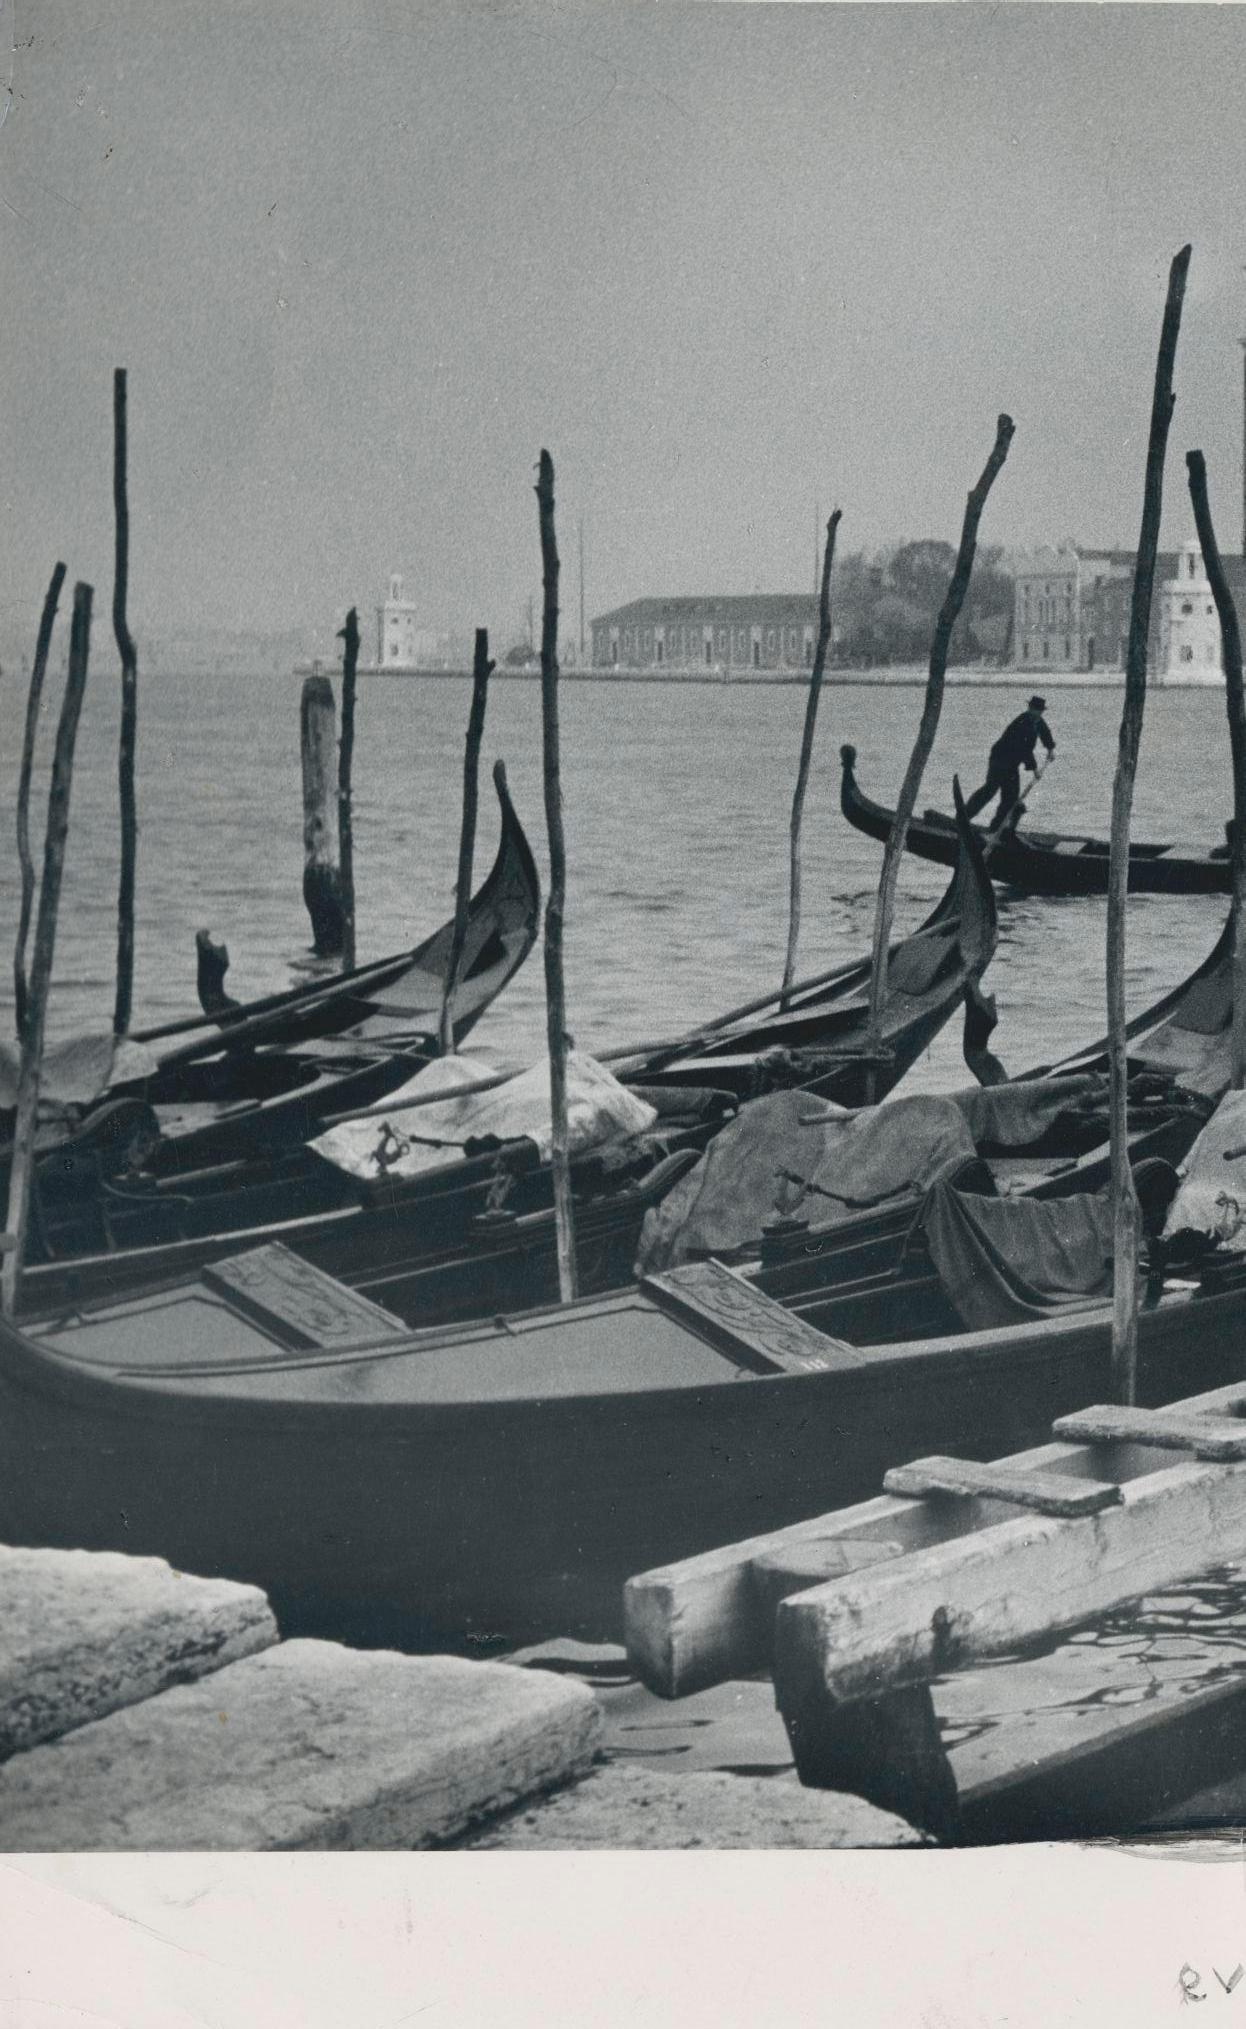 Venice - Gondolas on Waterfront, Italy, 1950s, 17, 3 x 11, 5 cm - Photograph by Erich Andres